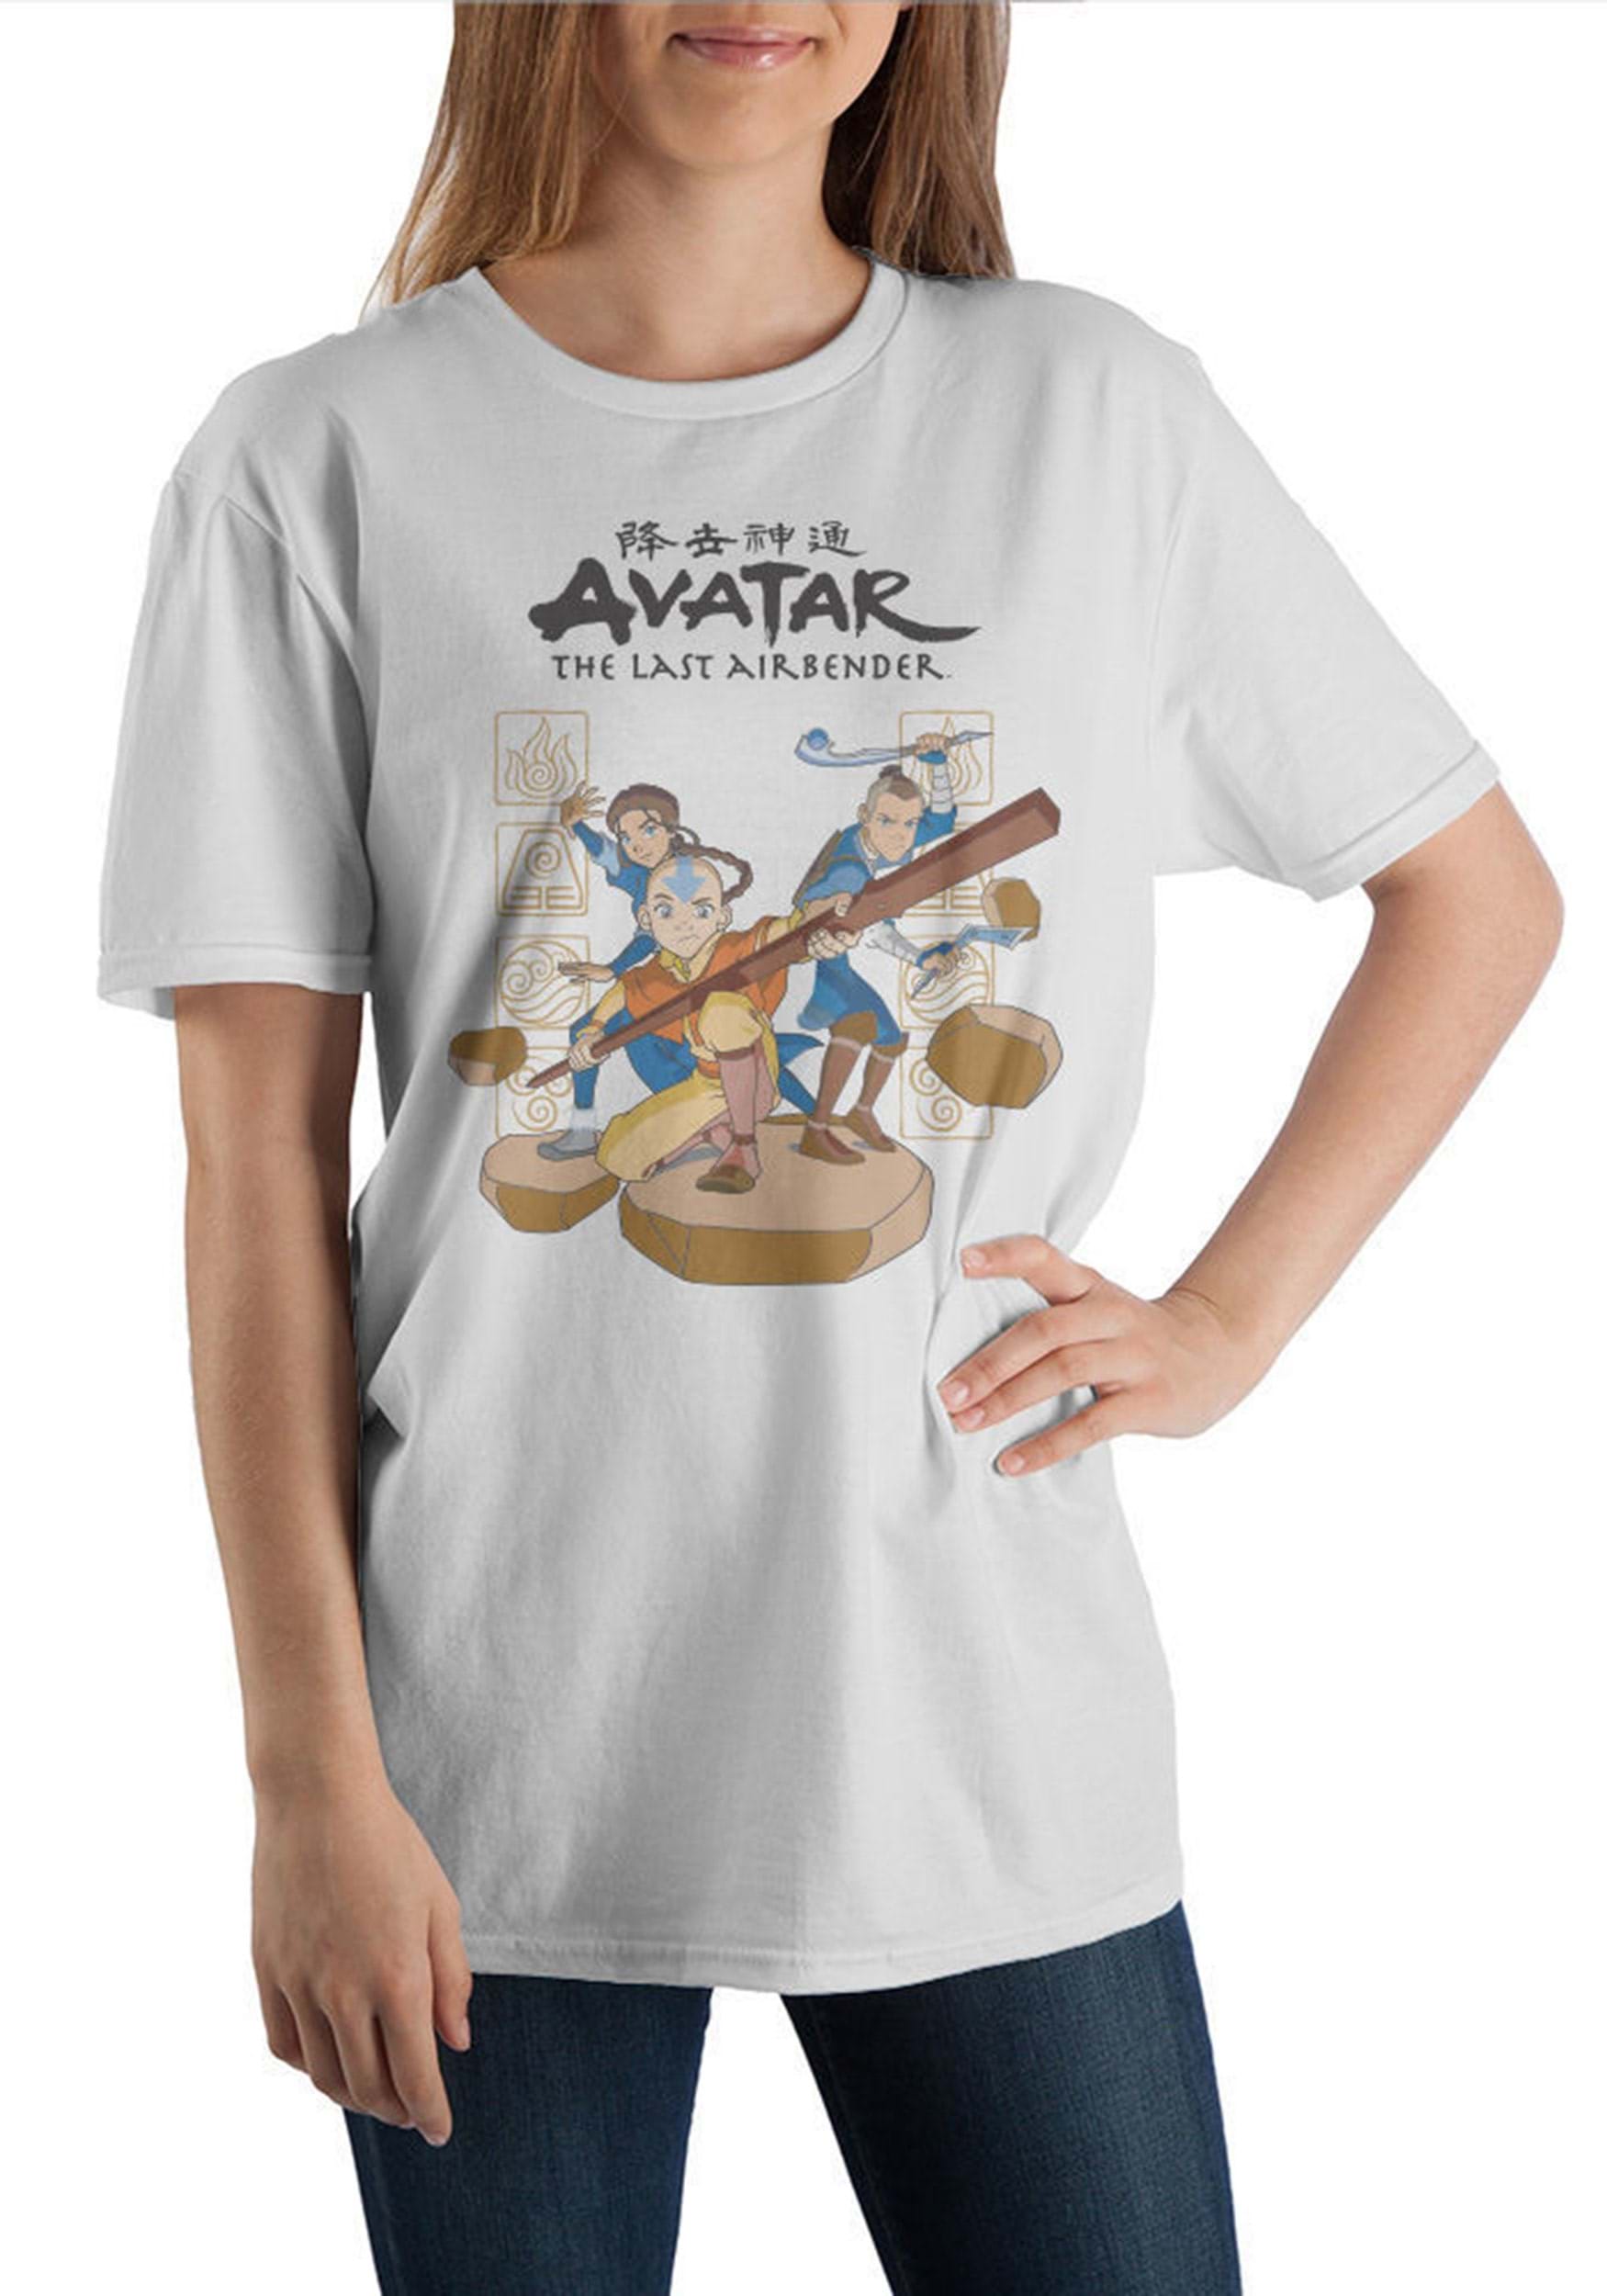 Avatar The Last Airbender White T-Shirt , Adult Apparel For Men And Women